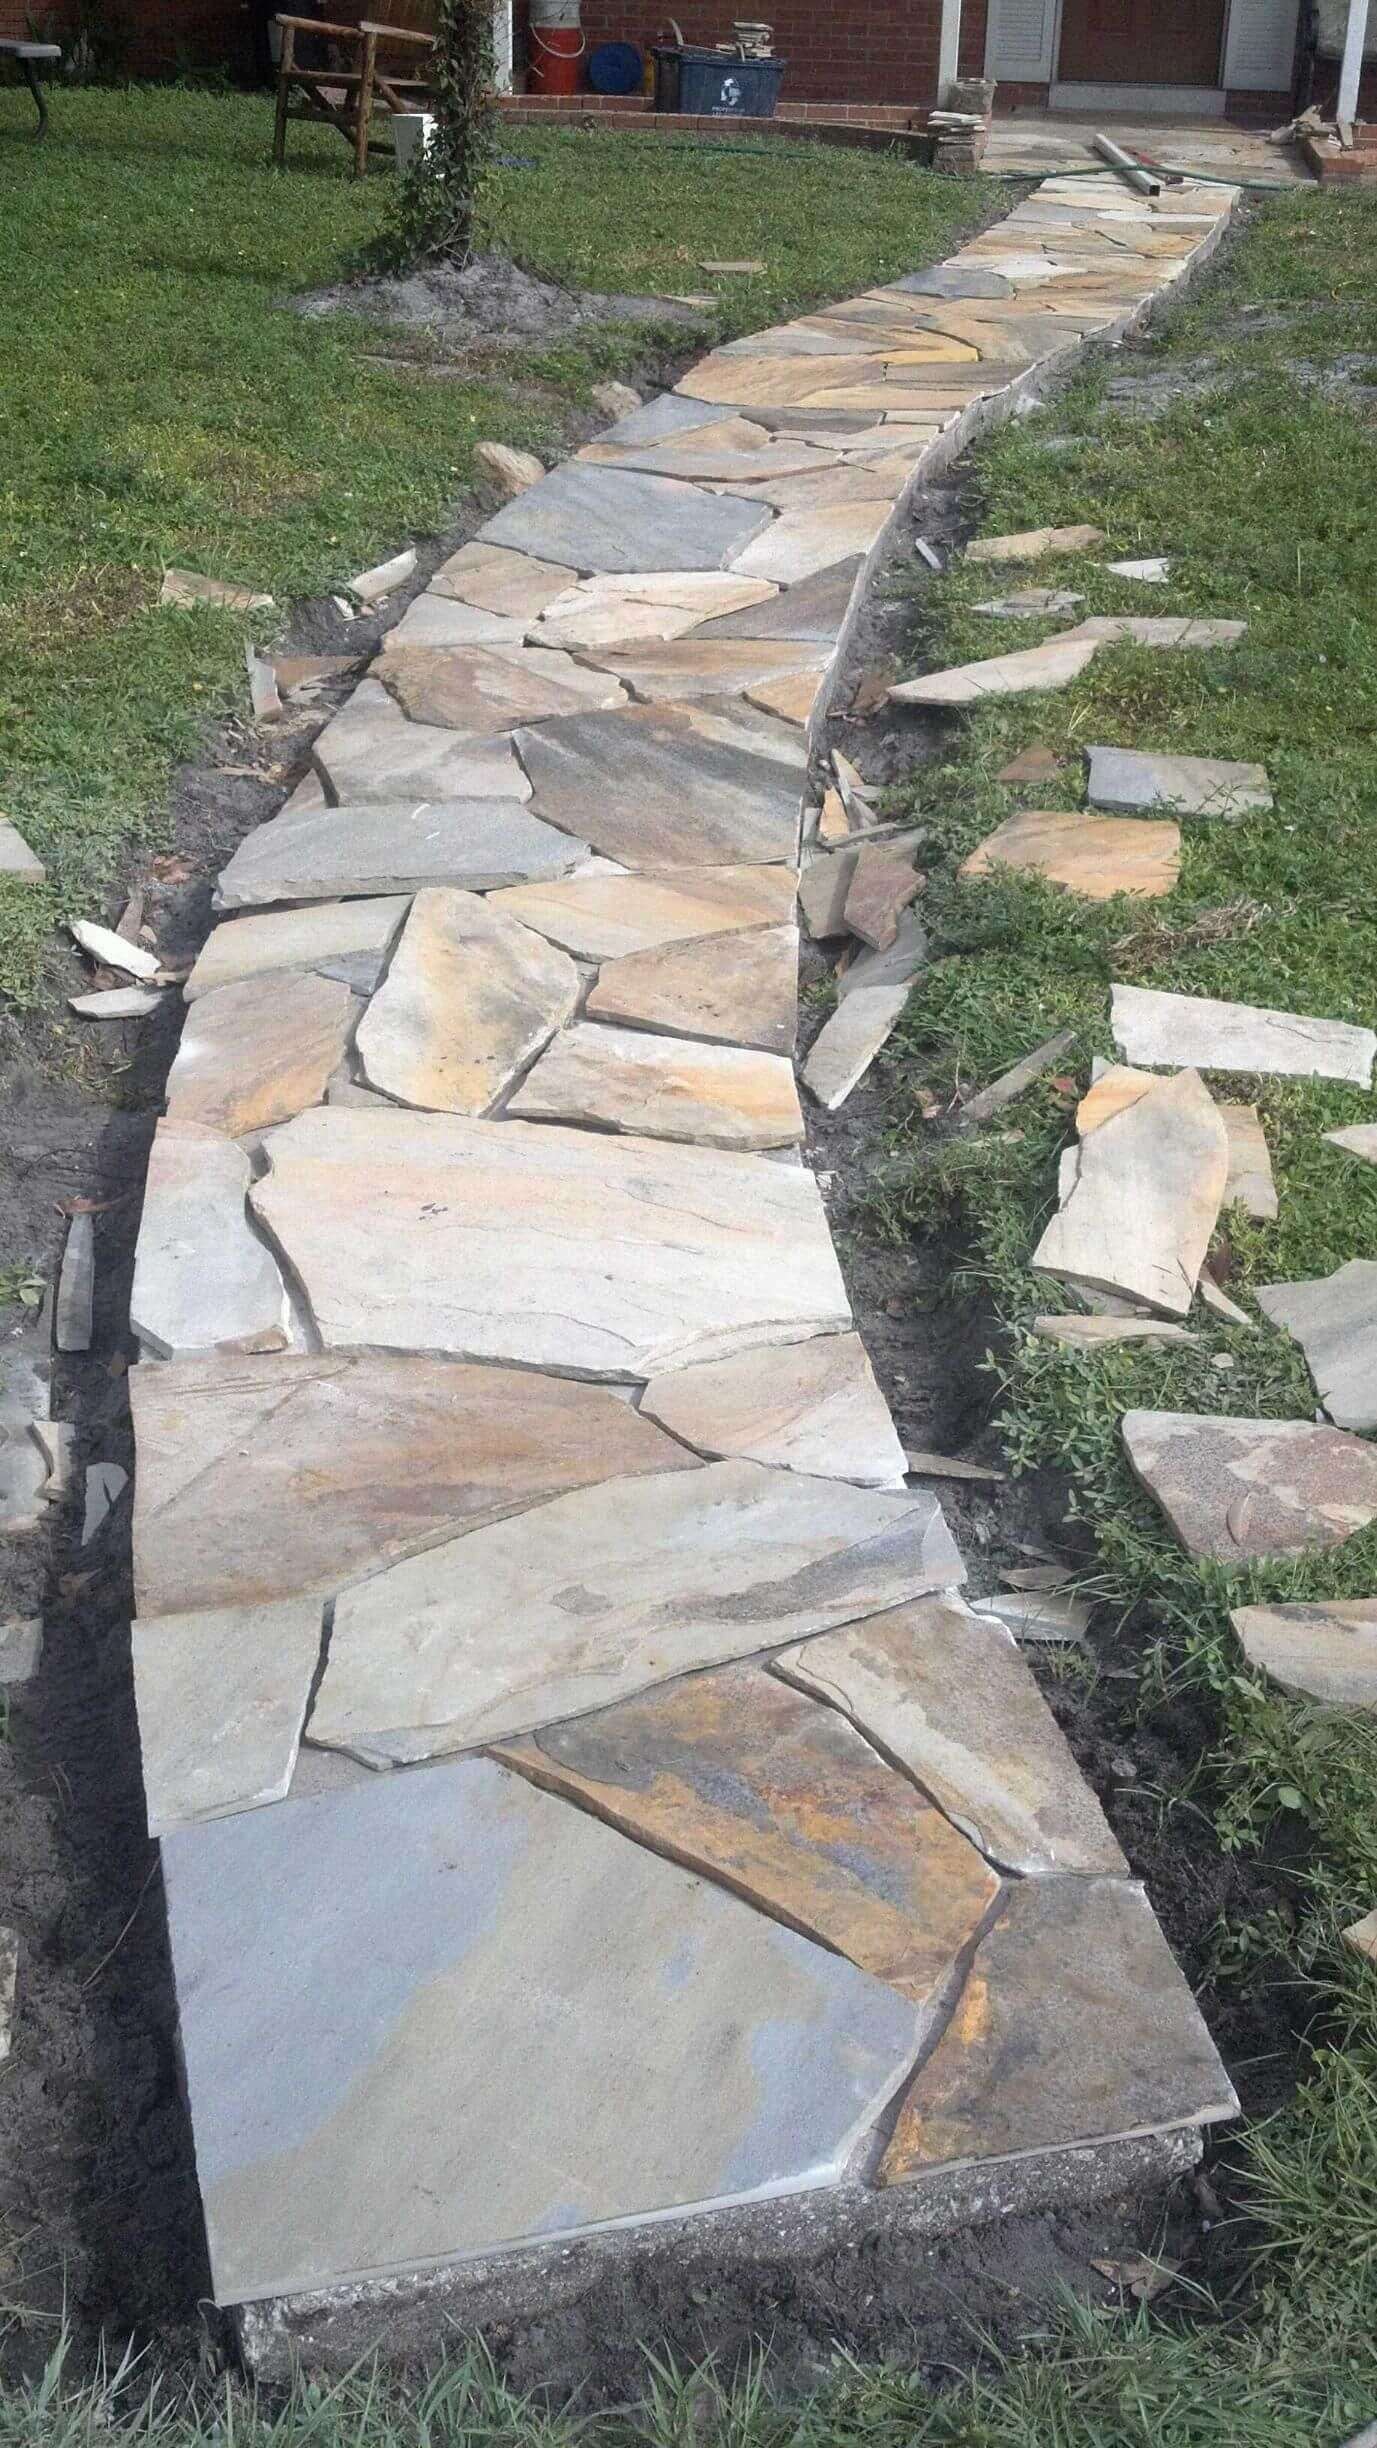 How To Install Flagstone Patio